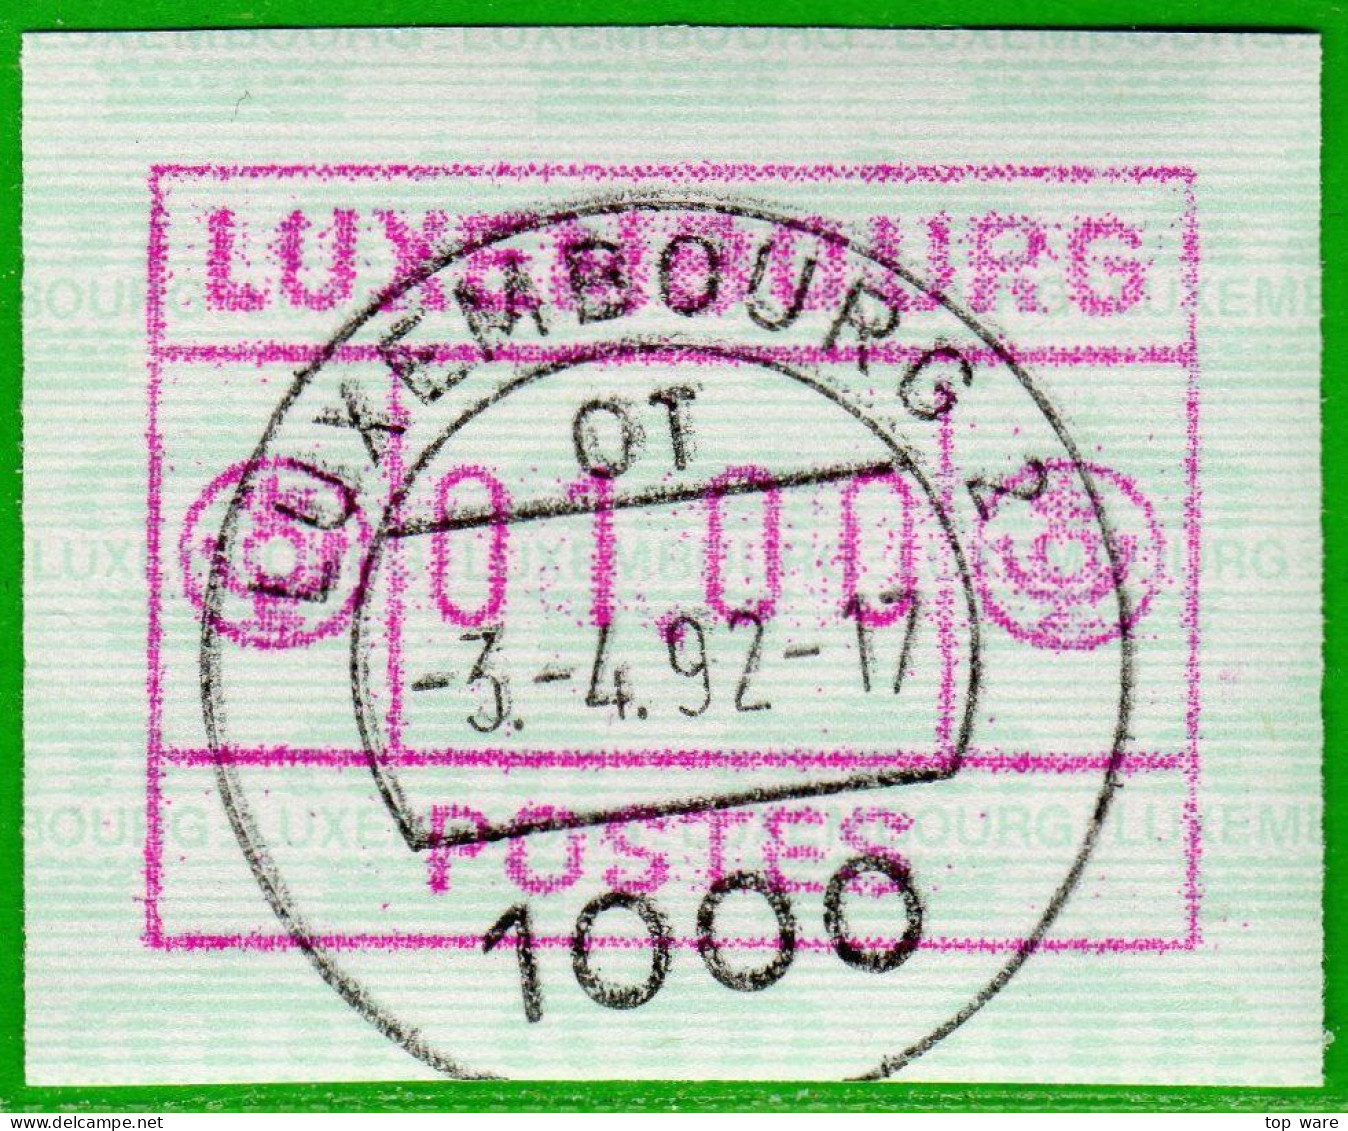 Luxemburg Luxembourg Timbres ATM  2 D Kleines Postes Rotlila / 01.00 Tages-O 3.4.1992 / Frama Automatenmarken - Vignettes D'affranchissement